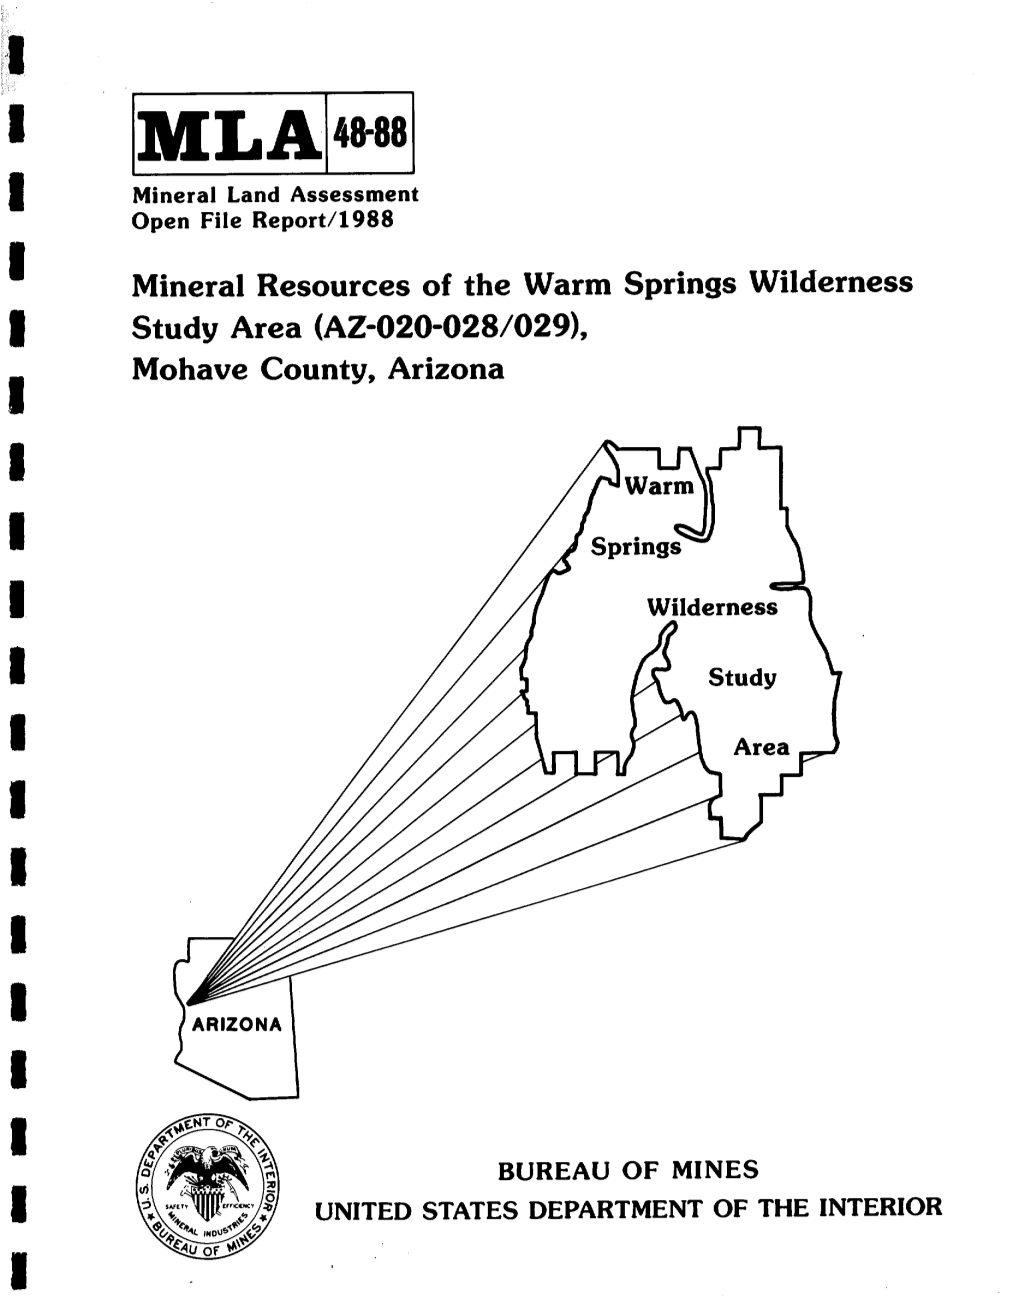 MINERAL RESOURCES of the WARM SPRINGS WILDERNESS STUDY AREA (AZ-O20-O28/O2g), MOHAVE COUNTY, ARIZONA